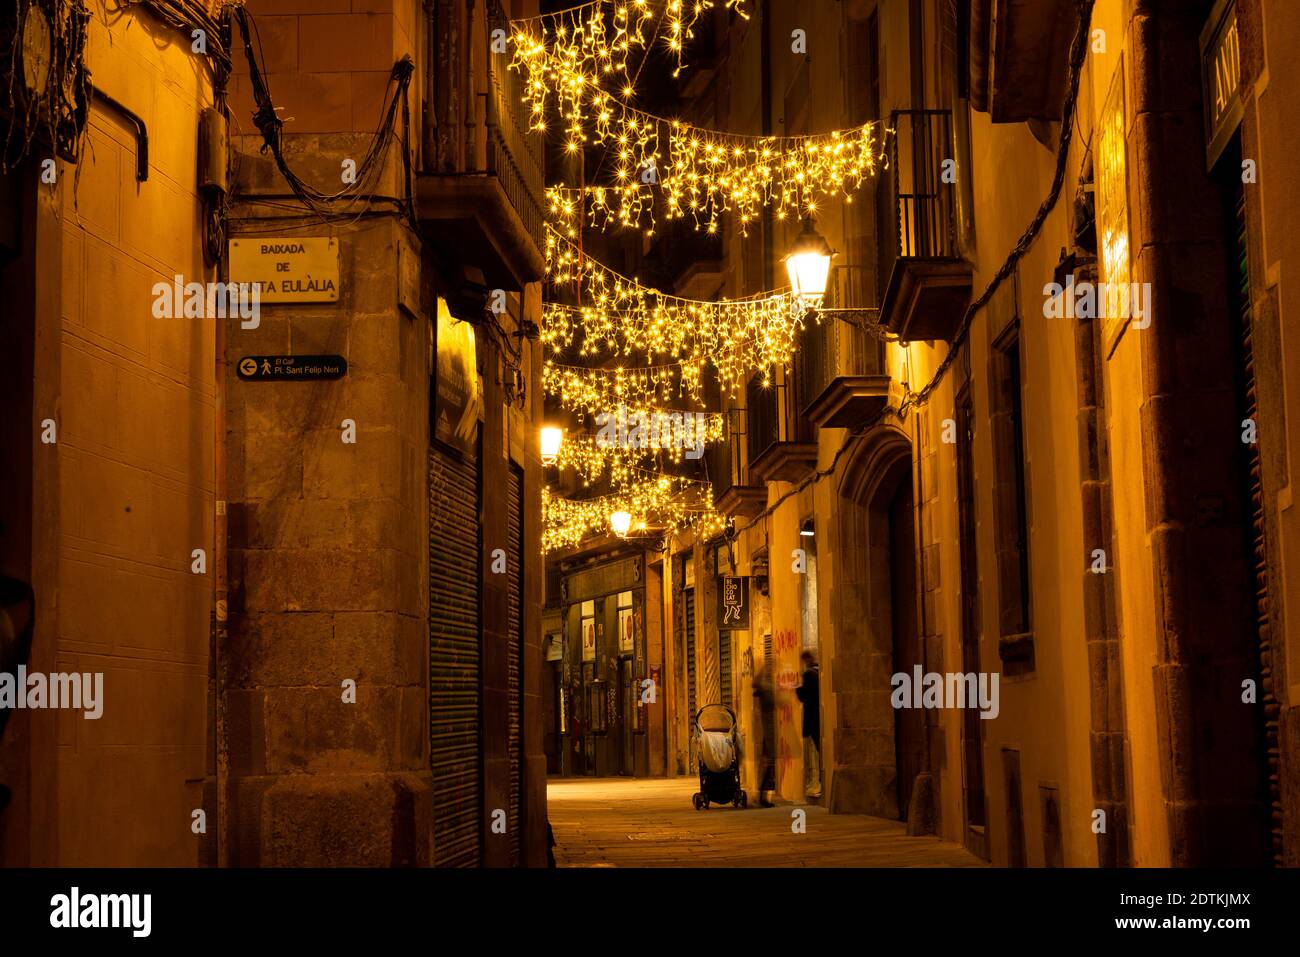 barcelona, spain - 21 december 2020: empty street christmas in barcelona at night curfew imposed for covid-19 crisis. concept of canceled christmas an Stock Photo